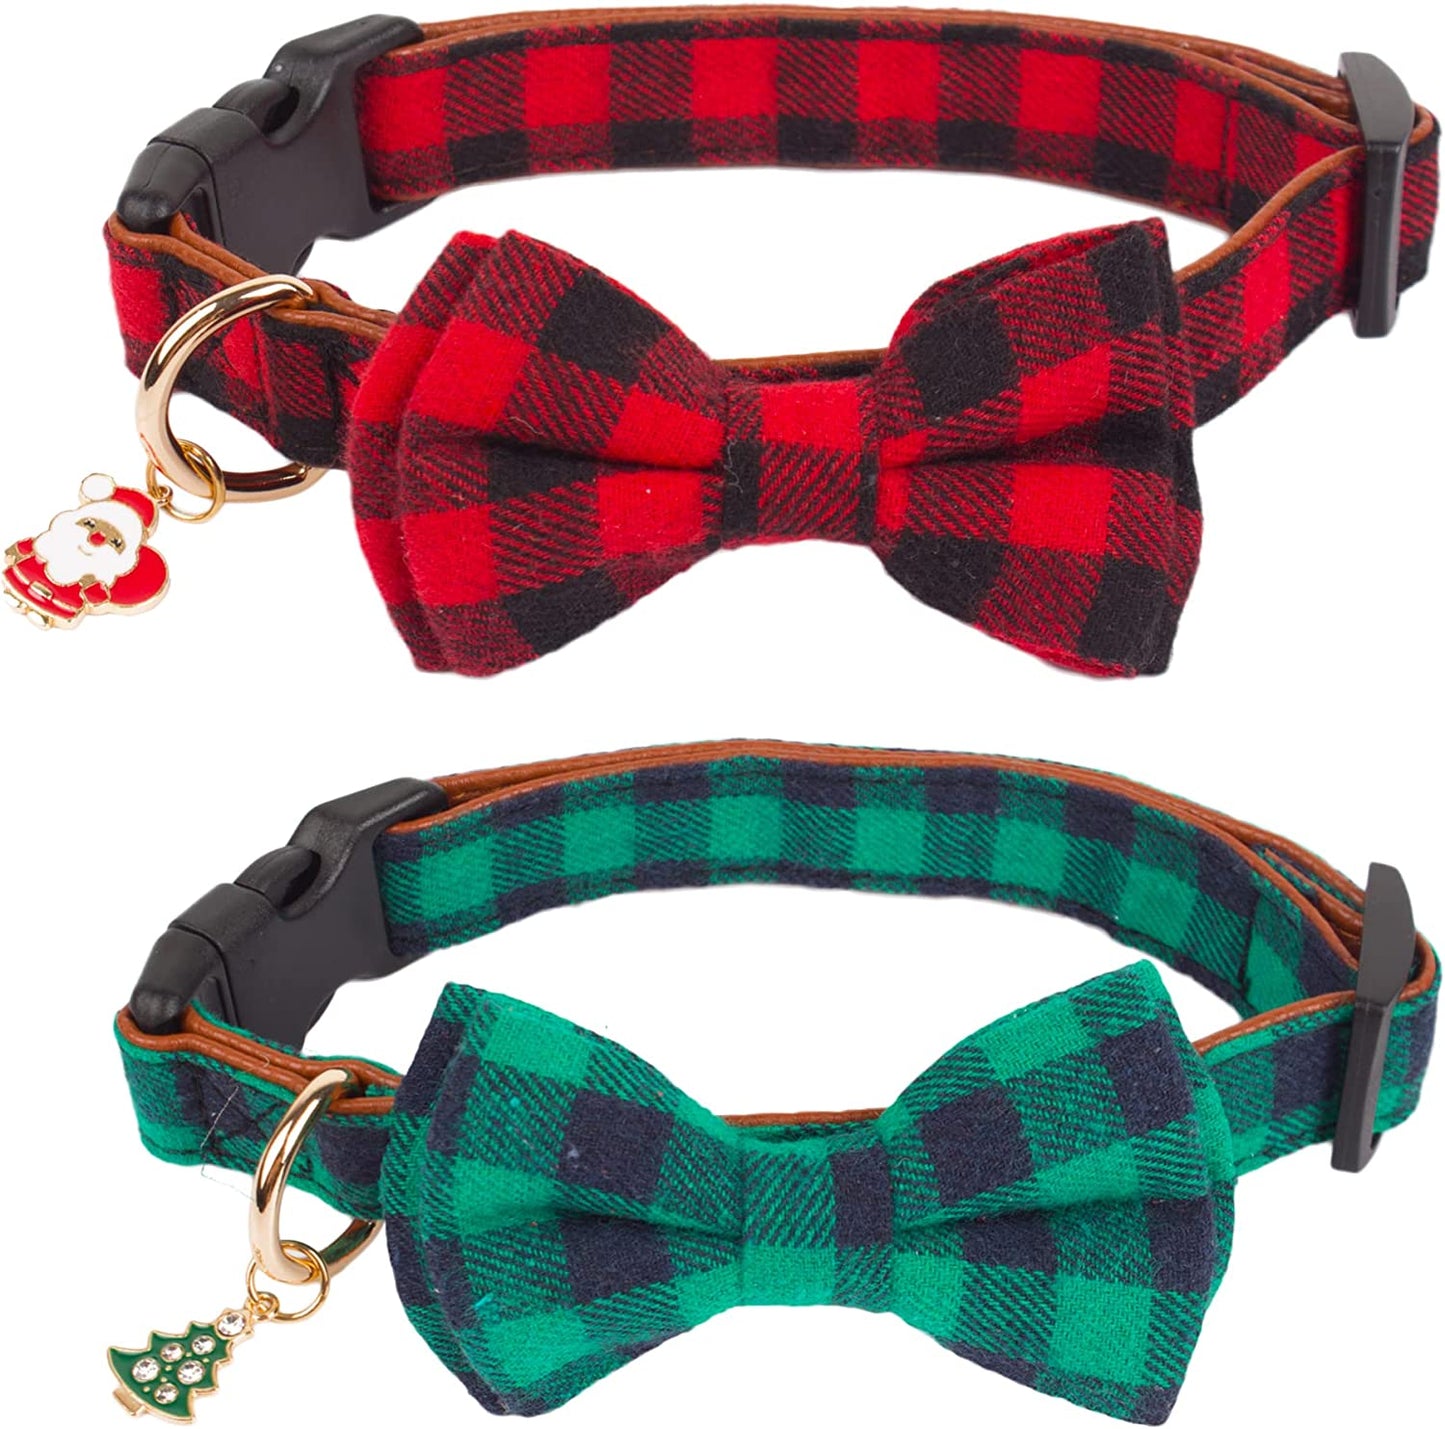 ADOGGYGO Christmas Dog Collar with Bow Tie Adjustable Bowtie Plaid Red Green Dog Pet Collars for Small Medium Large Dogs (Small, Red&Green&White) Animals & Pet Supplies > Pet Supplies > Dog Supplies > Dog Apparel ADOGGYGO Red&Green Small 